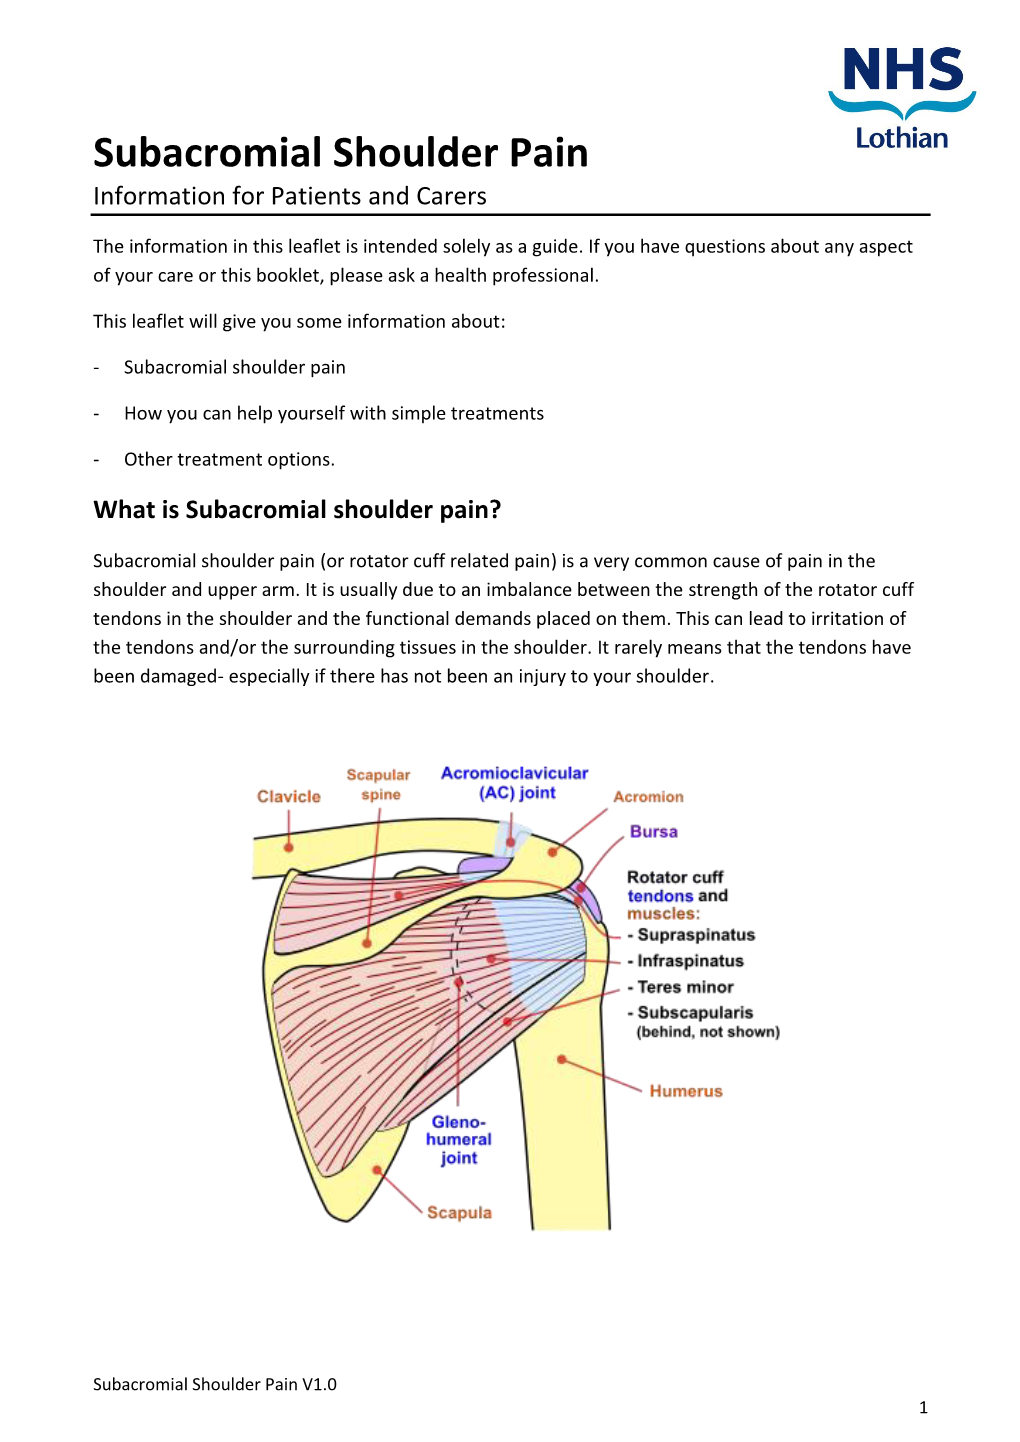 Subacromial Shoulder Pain Information for Patients and Carers